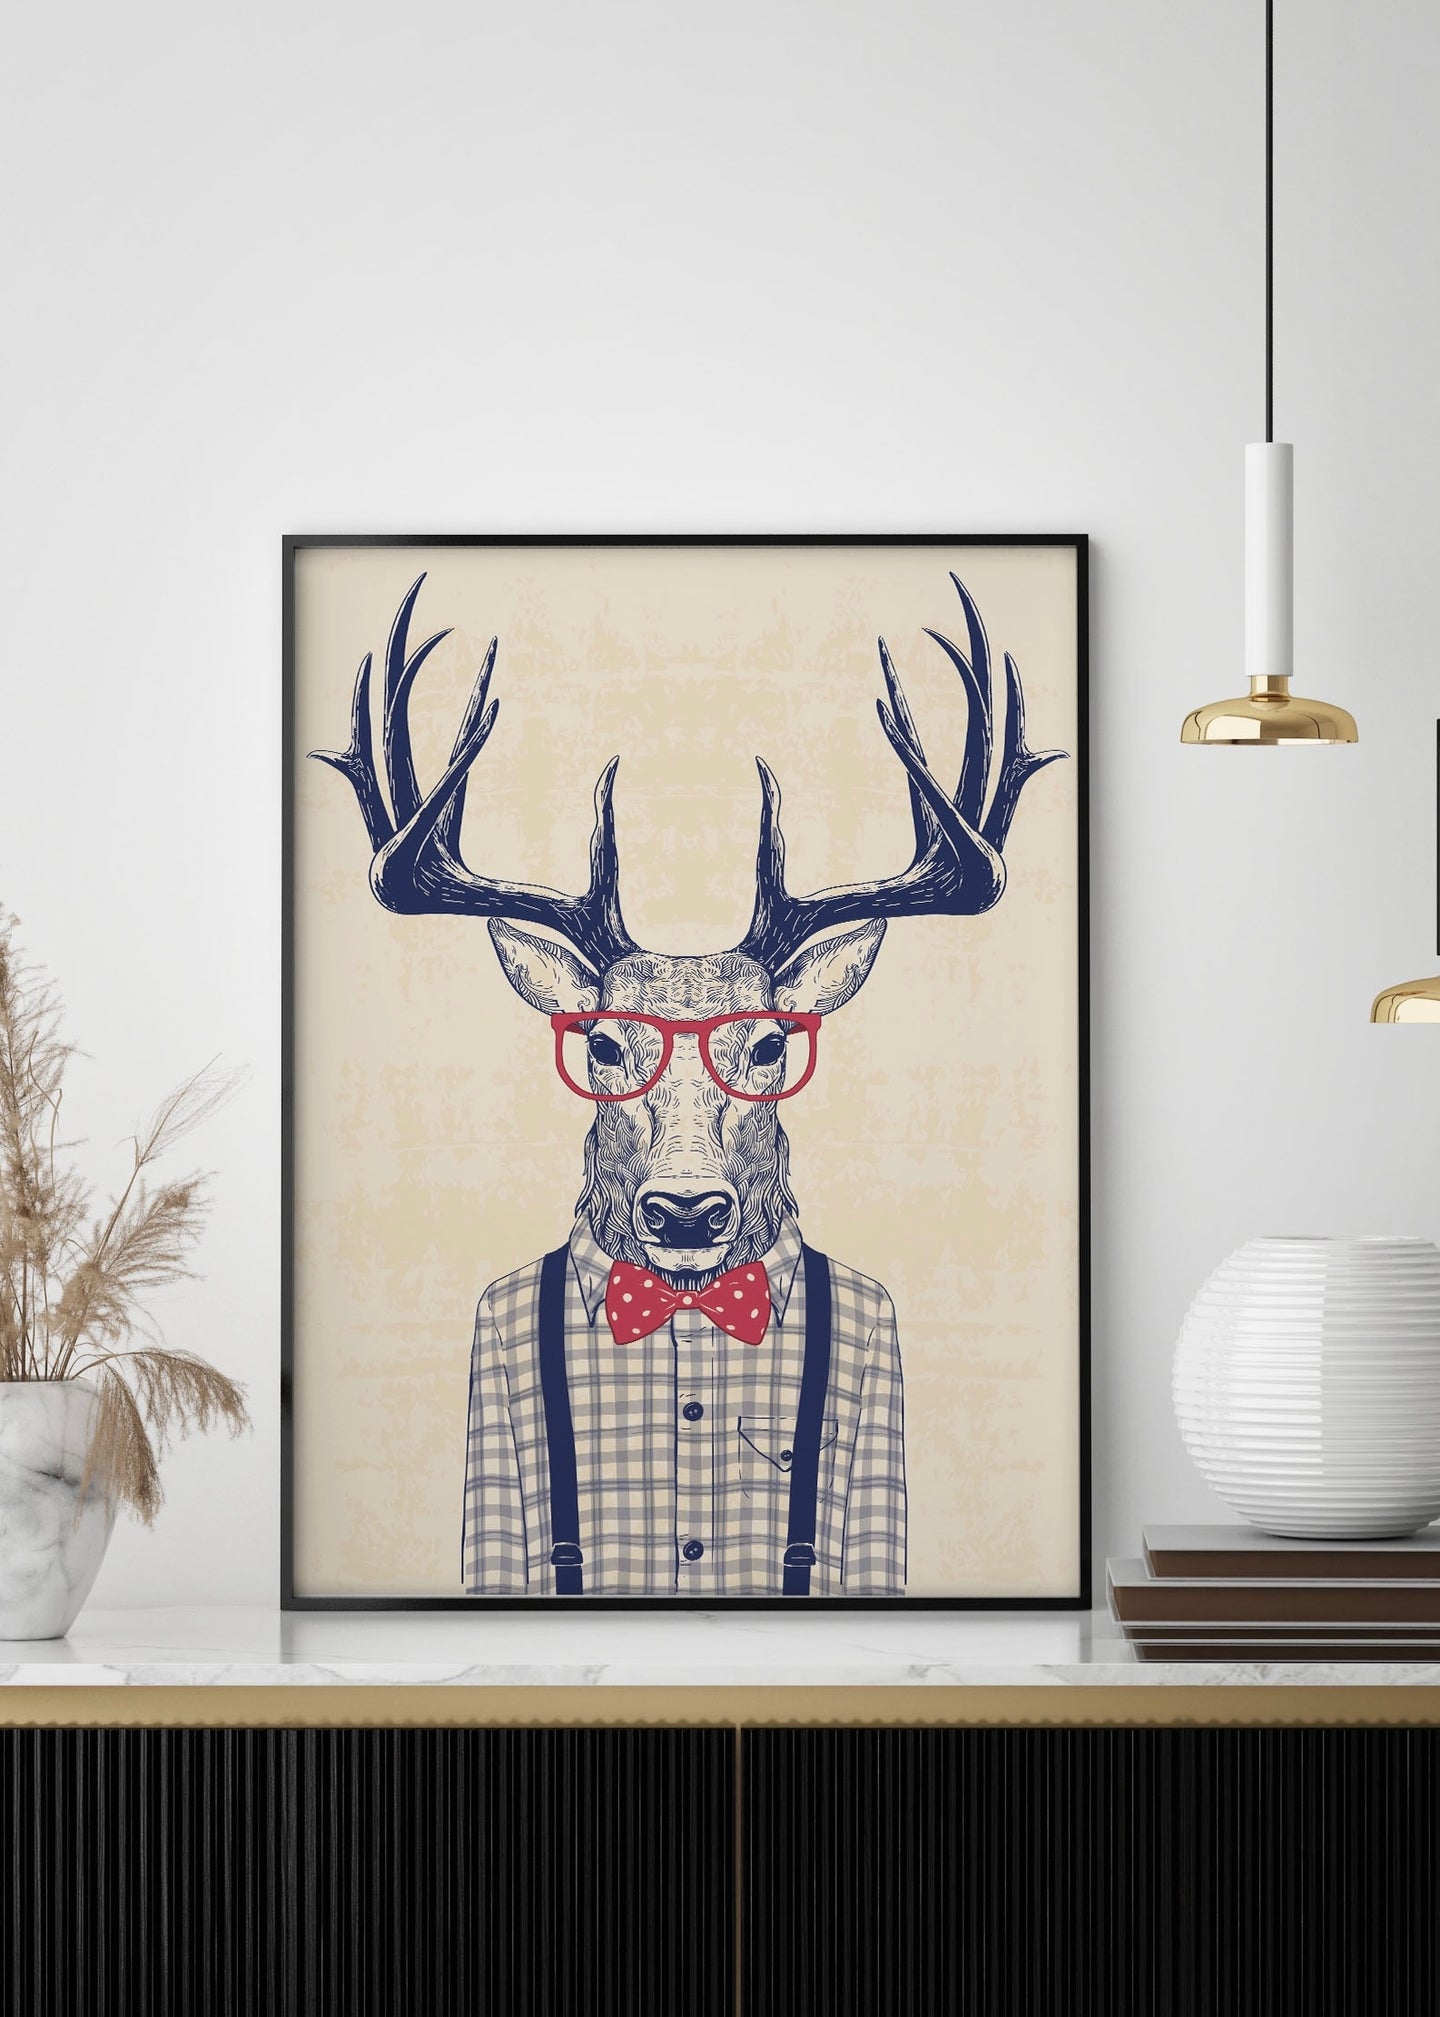 Hipster Stag wearing glasses illustration | Quirky wall art Print